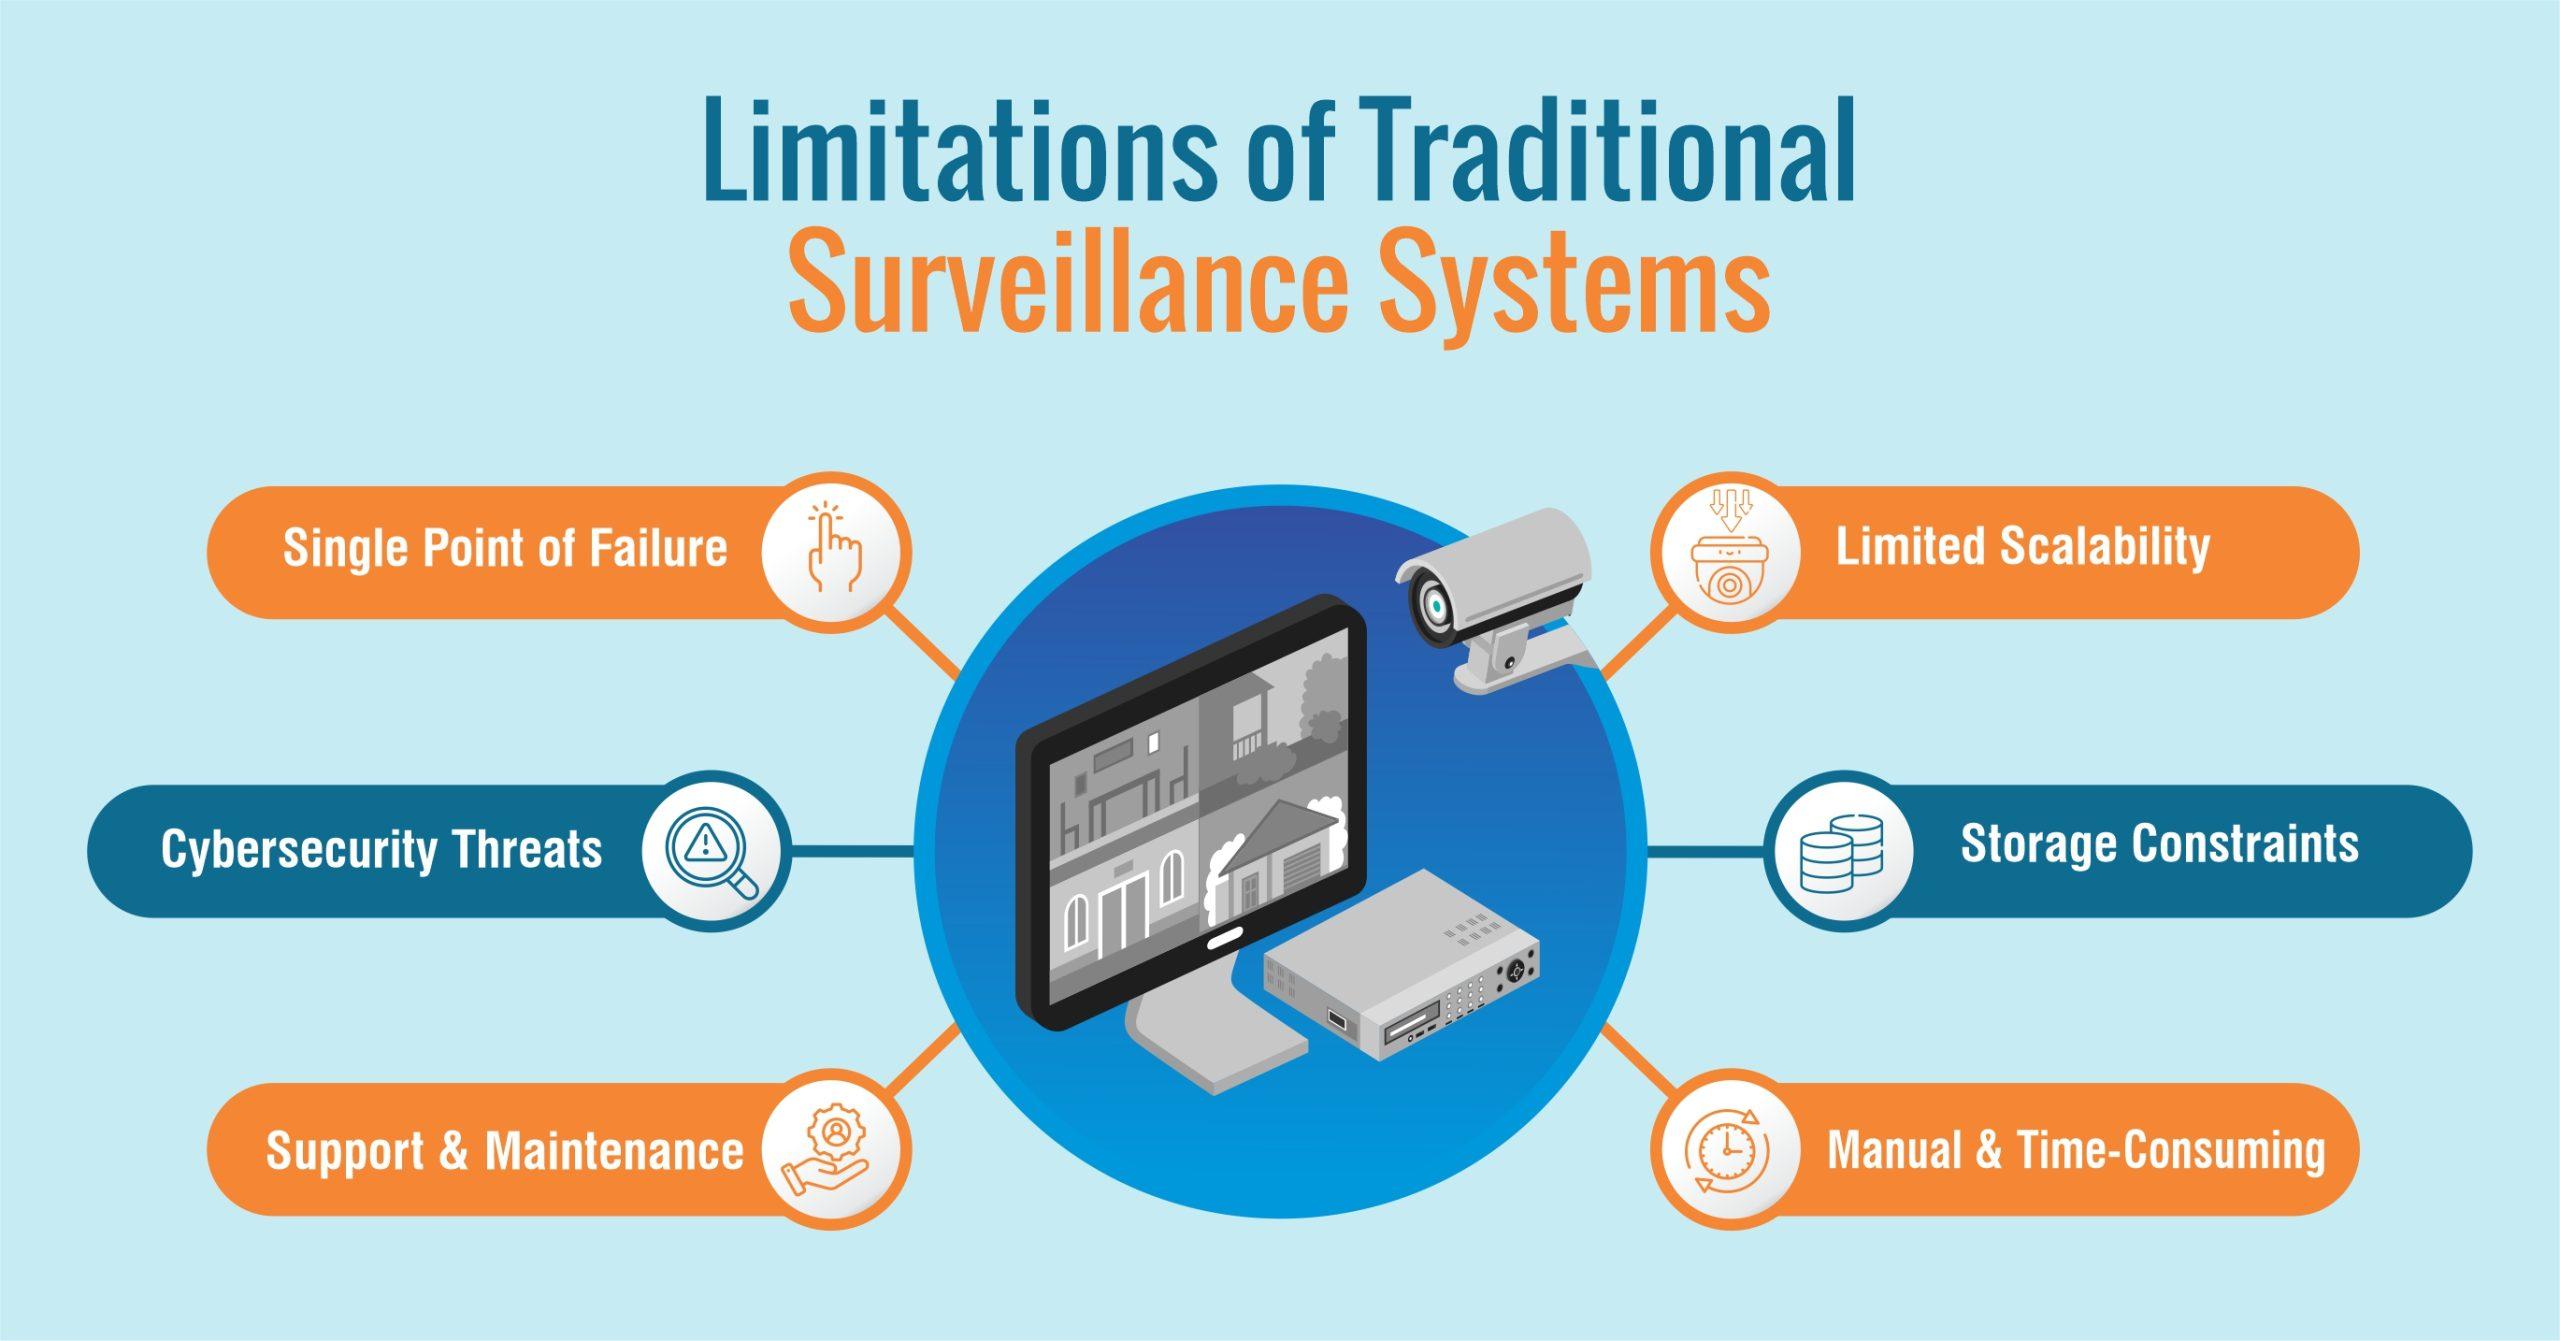 Limitations of Traditional Surveillance Systems